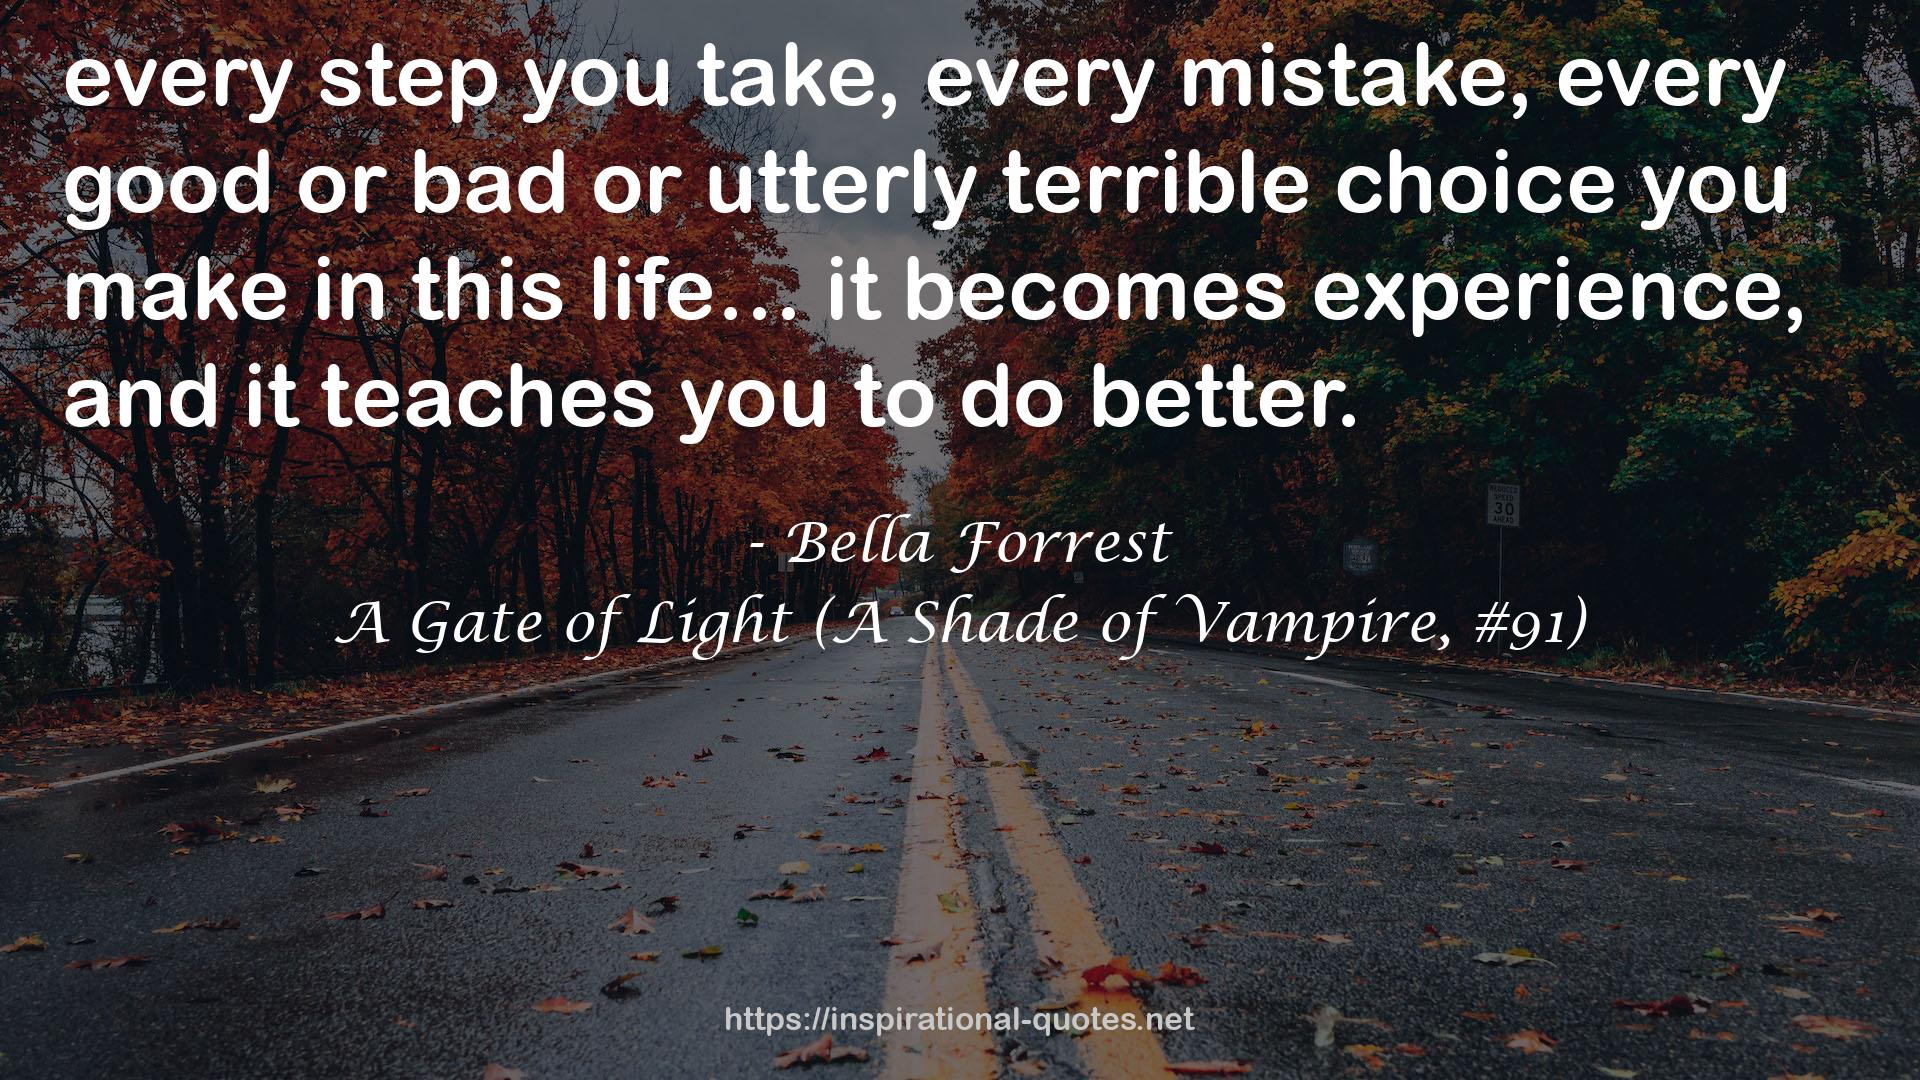 A Gate of Light (A Shade of Vampire, #91) QUOTES